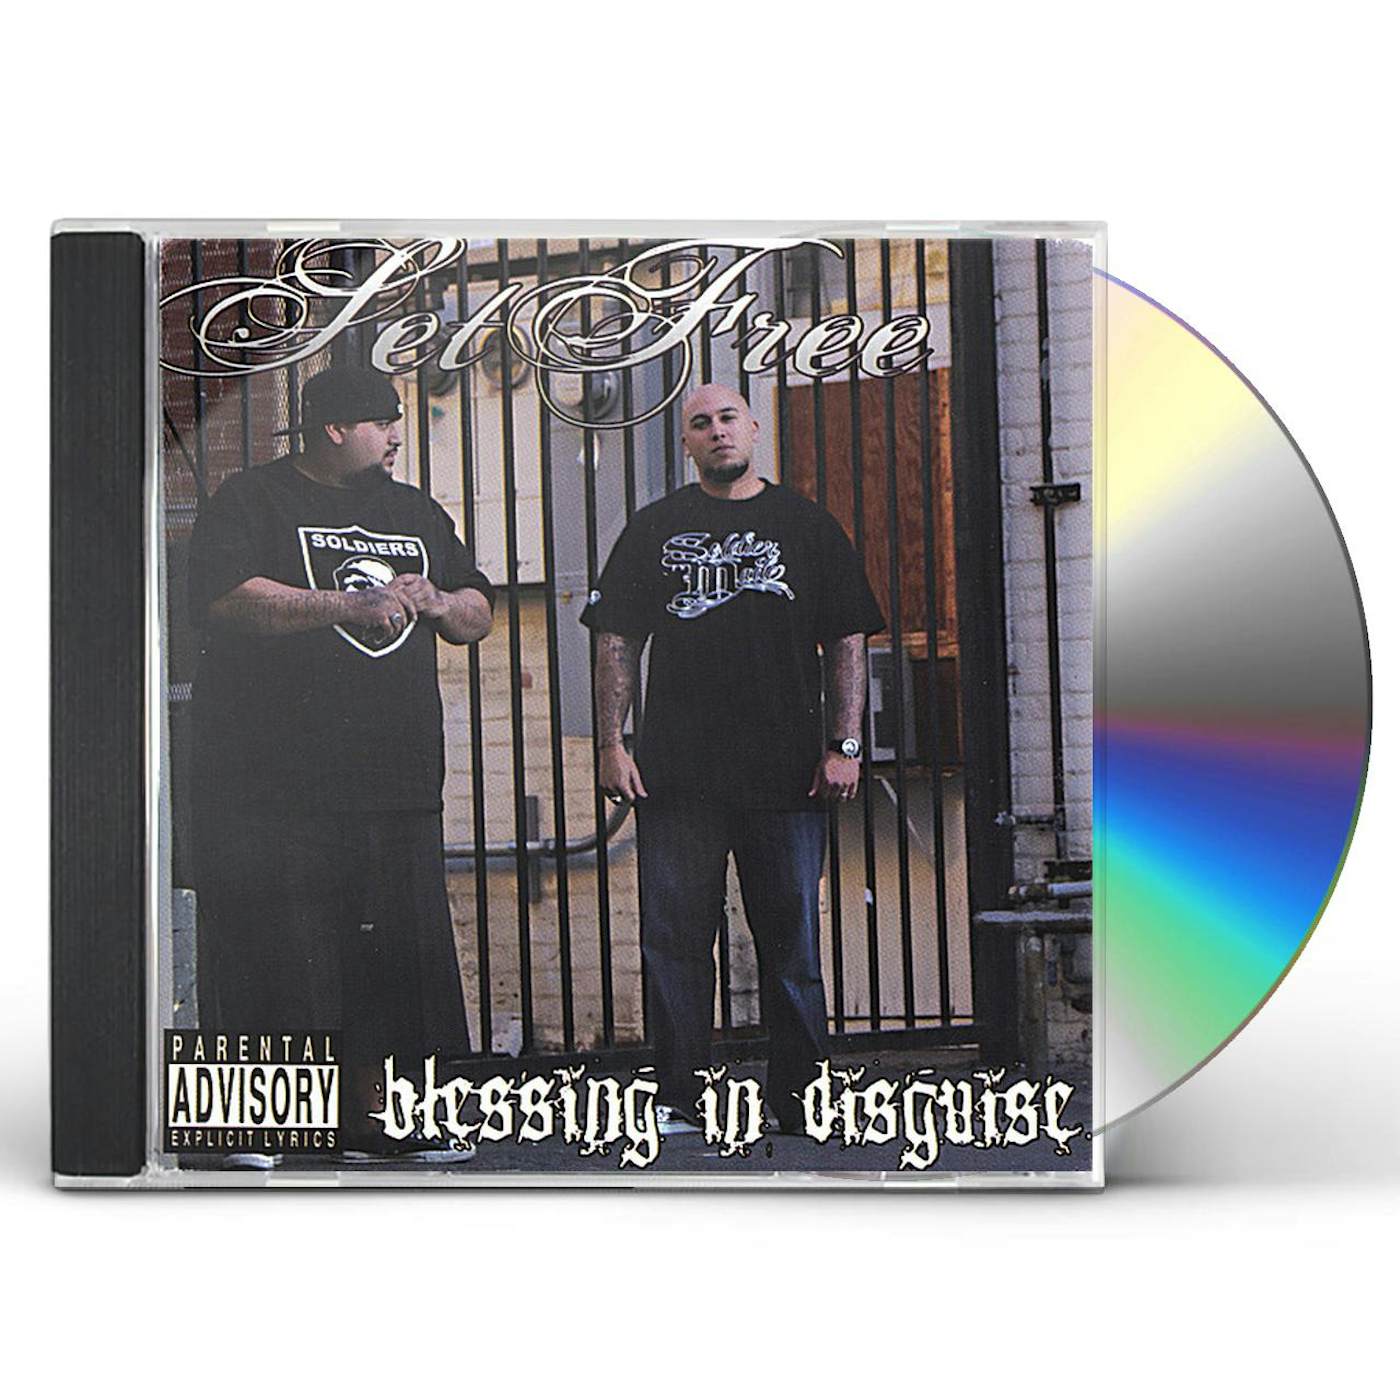 Set Free BLESSING IN DISGUISE CD